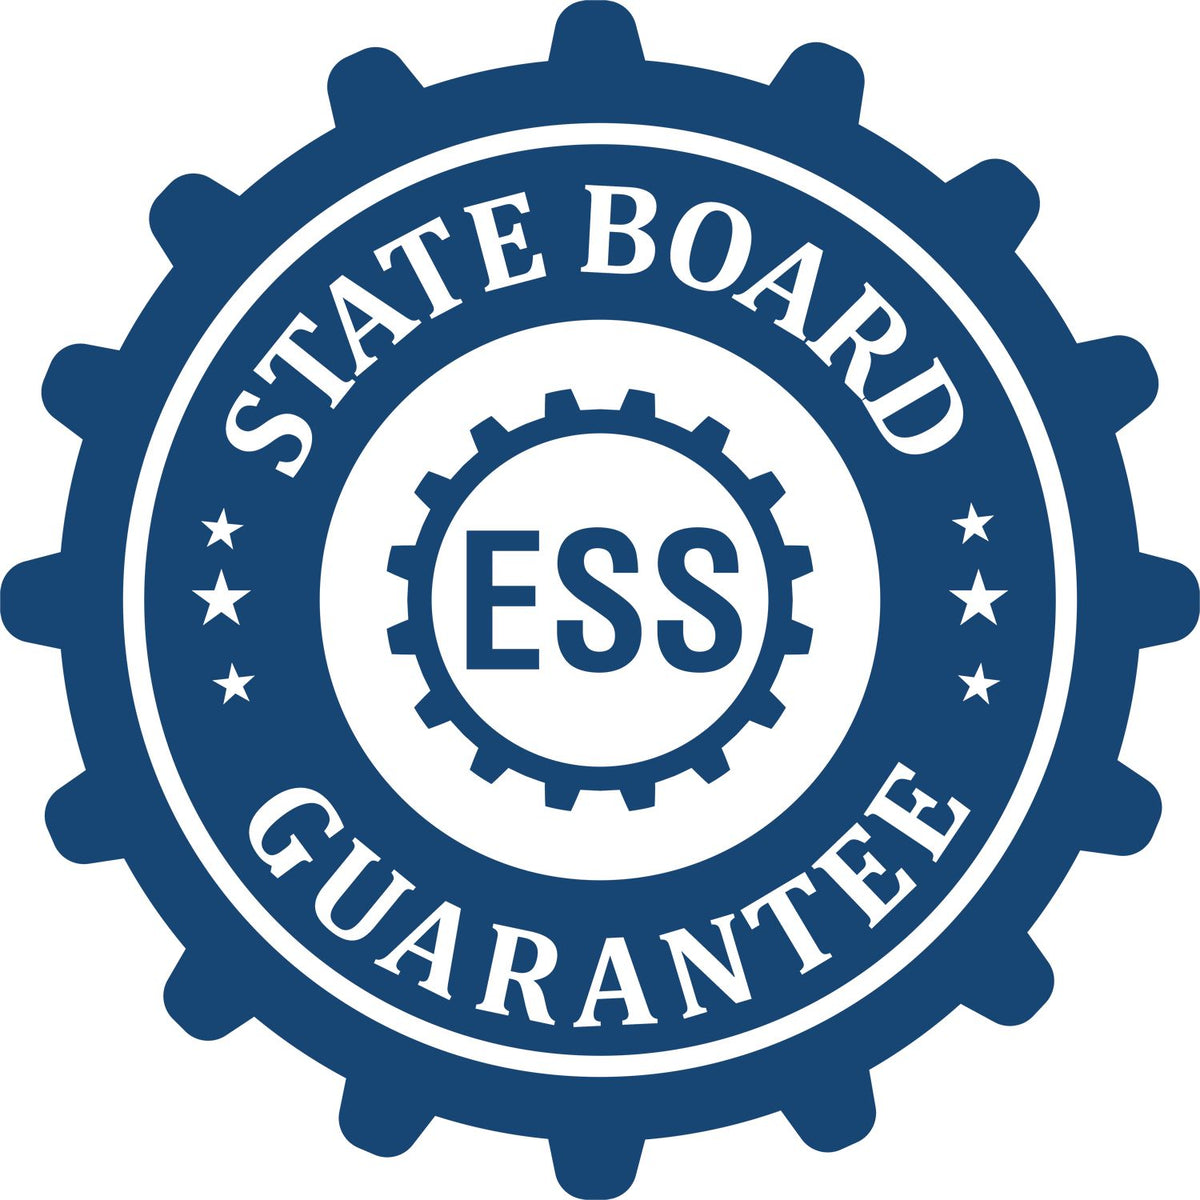 An emblem in a gear shape illustrating a state board guarantee for the Hybrid Connecticut Land Surveyor Seal